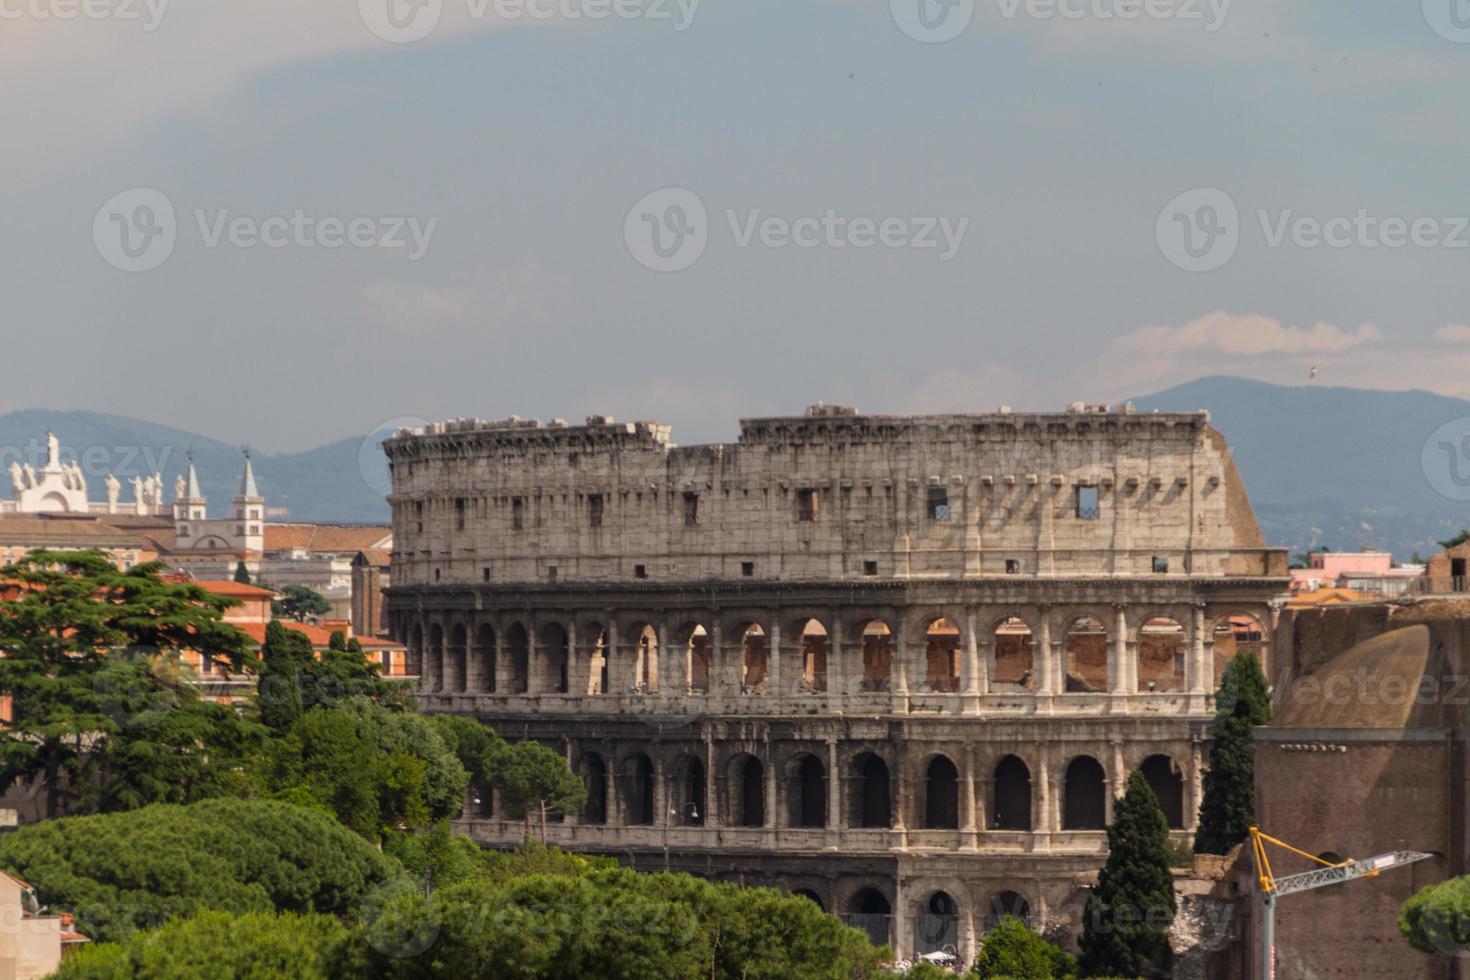 Colosseum of Rome, Italy photo